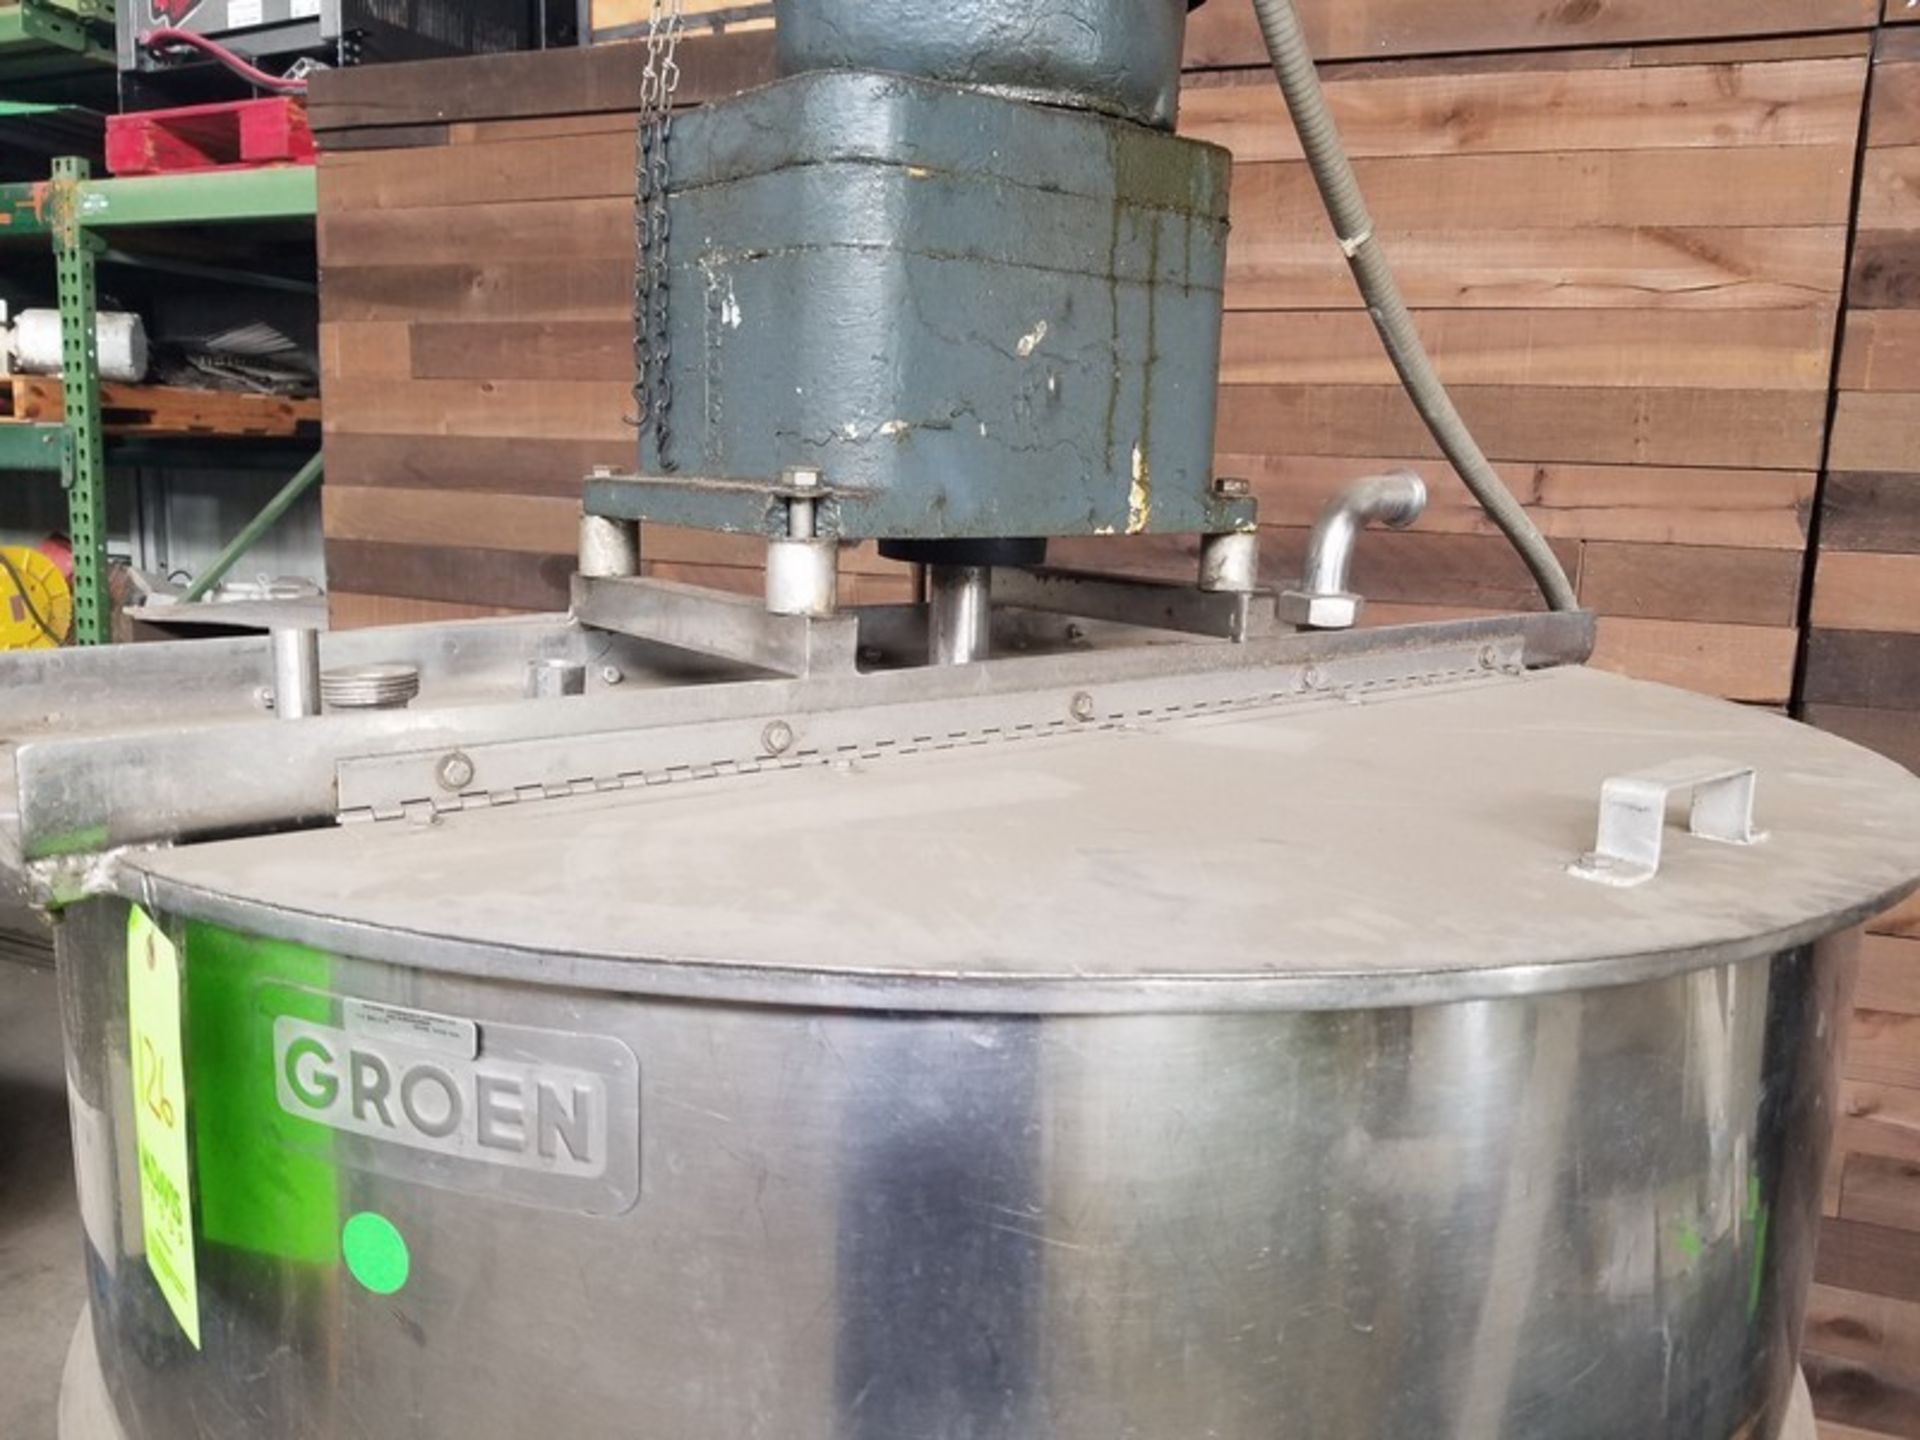 Groen Aprox. 200 Gal. Stainless Steel Jacket Tank, size: 30" wide x 24" deep, stainless steel frame - Image 3 of 8